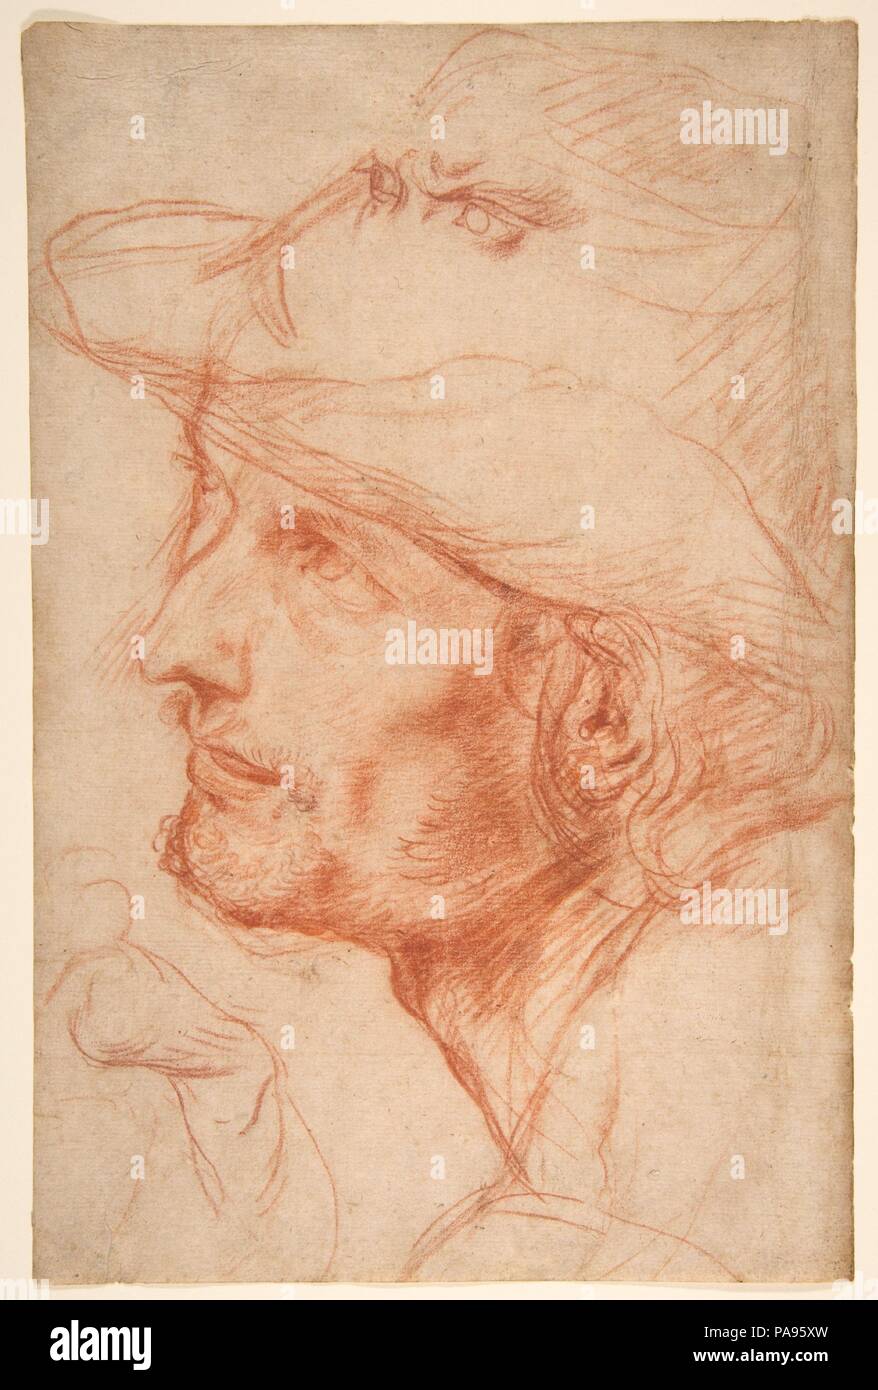 Head of a Man. Artist: Antonio d'Enrico Tanzio (Tanzio da Varallo) (Italian, Riale d'Alagna 1575/80-1632/33 Novara). Dimensions: 11 15/16 x 7 13/16in. (30.4 x 19.9cm). Date: 1575-1633.  The Lombard artist known as Tanzio da Varallo developed a bold, personal style based on his training ?in his father's workshop and his exposure to the works of Caravaggio (1571-1610) in Rome. This striking ?study in red chalk seems to be preparatory for one of the shepherds in Tanzio's fresco of the Annunciation to the Shepherds, in the church of Santa Maria della Pace, in Milan, a project that dates to the art Stock Photo